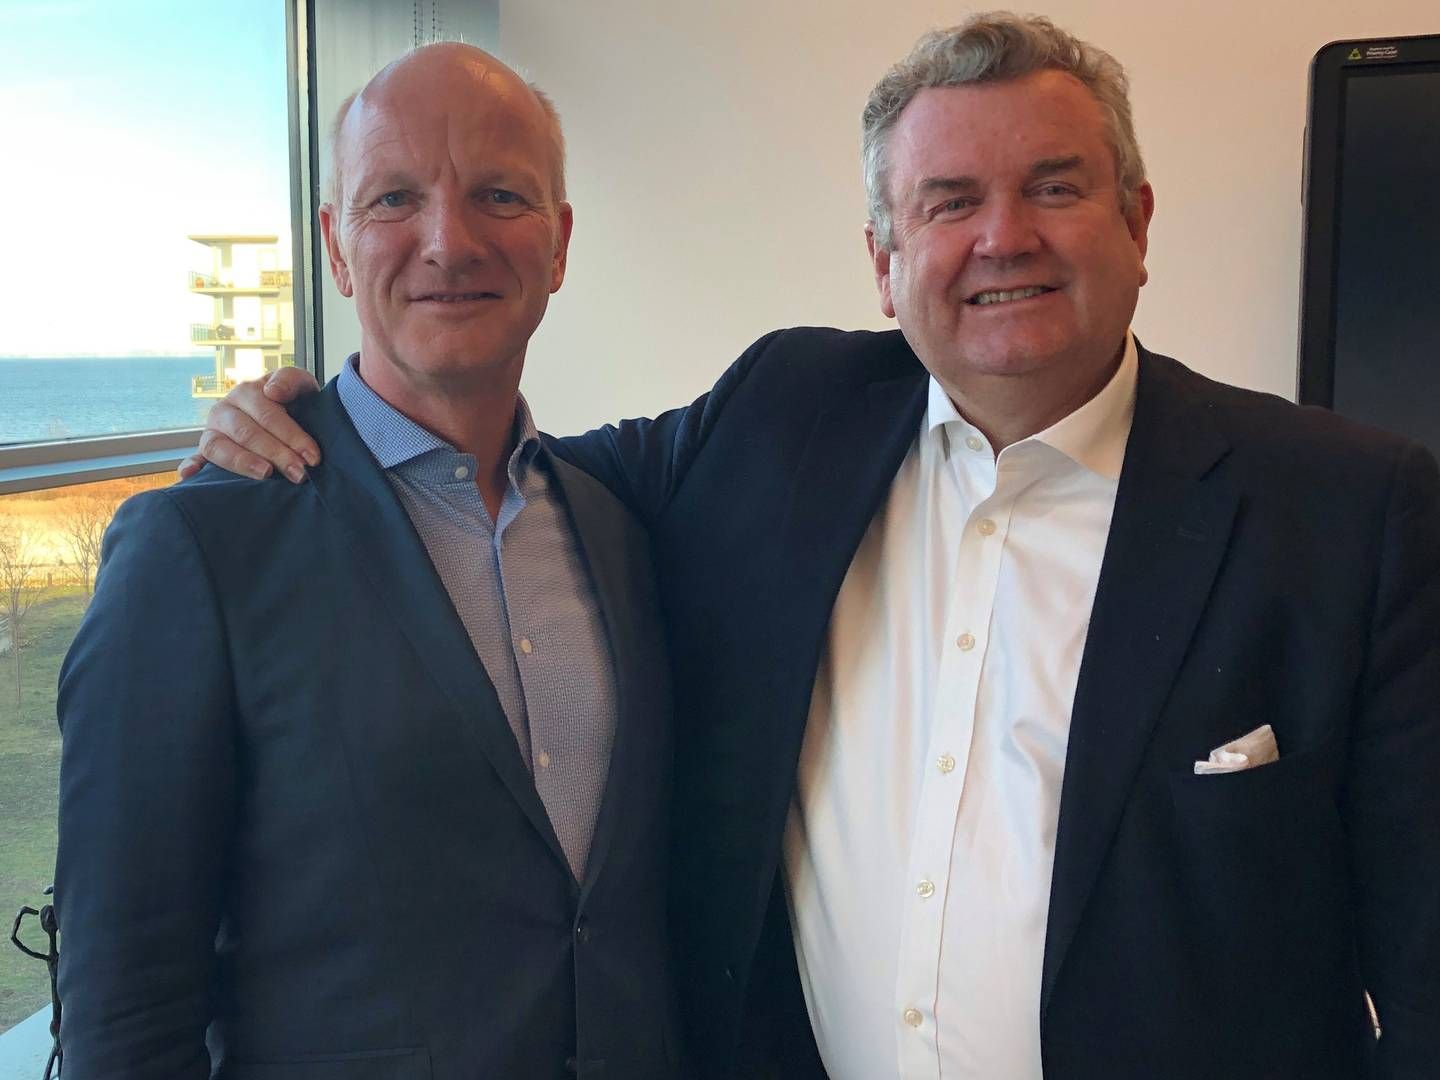 Aberdeen Standard Investment's Danish country head Henrik Kruse (left) and global head of distribution Campbell Flemming (right) | Photo: Søren Rathlou Top